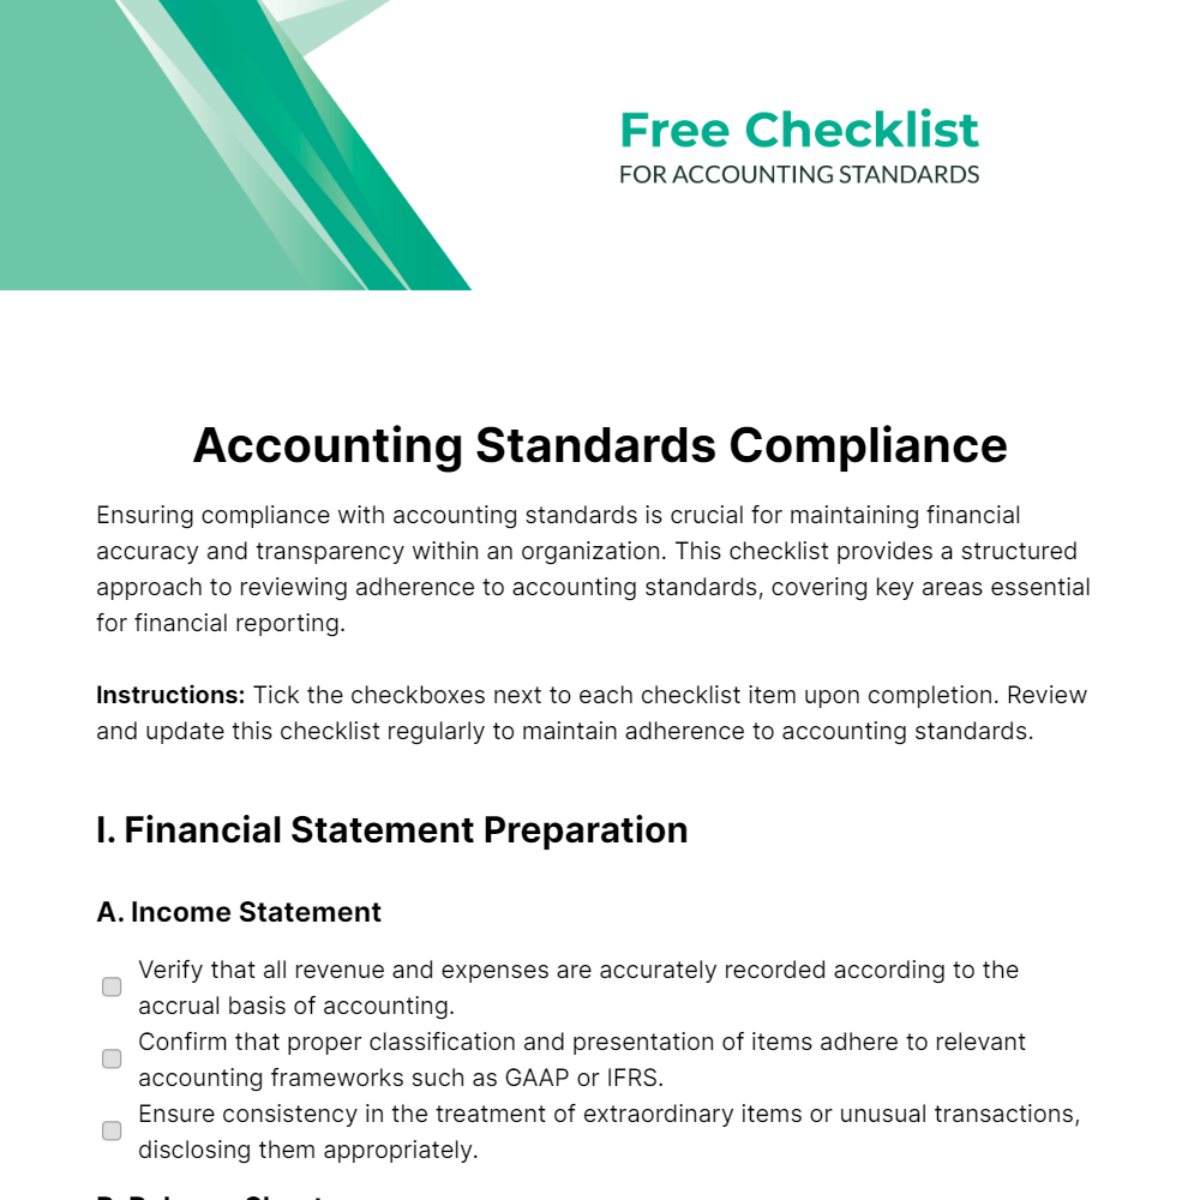 Free Checklist for Accounting Standards Template